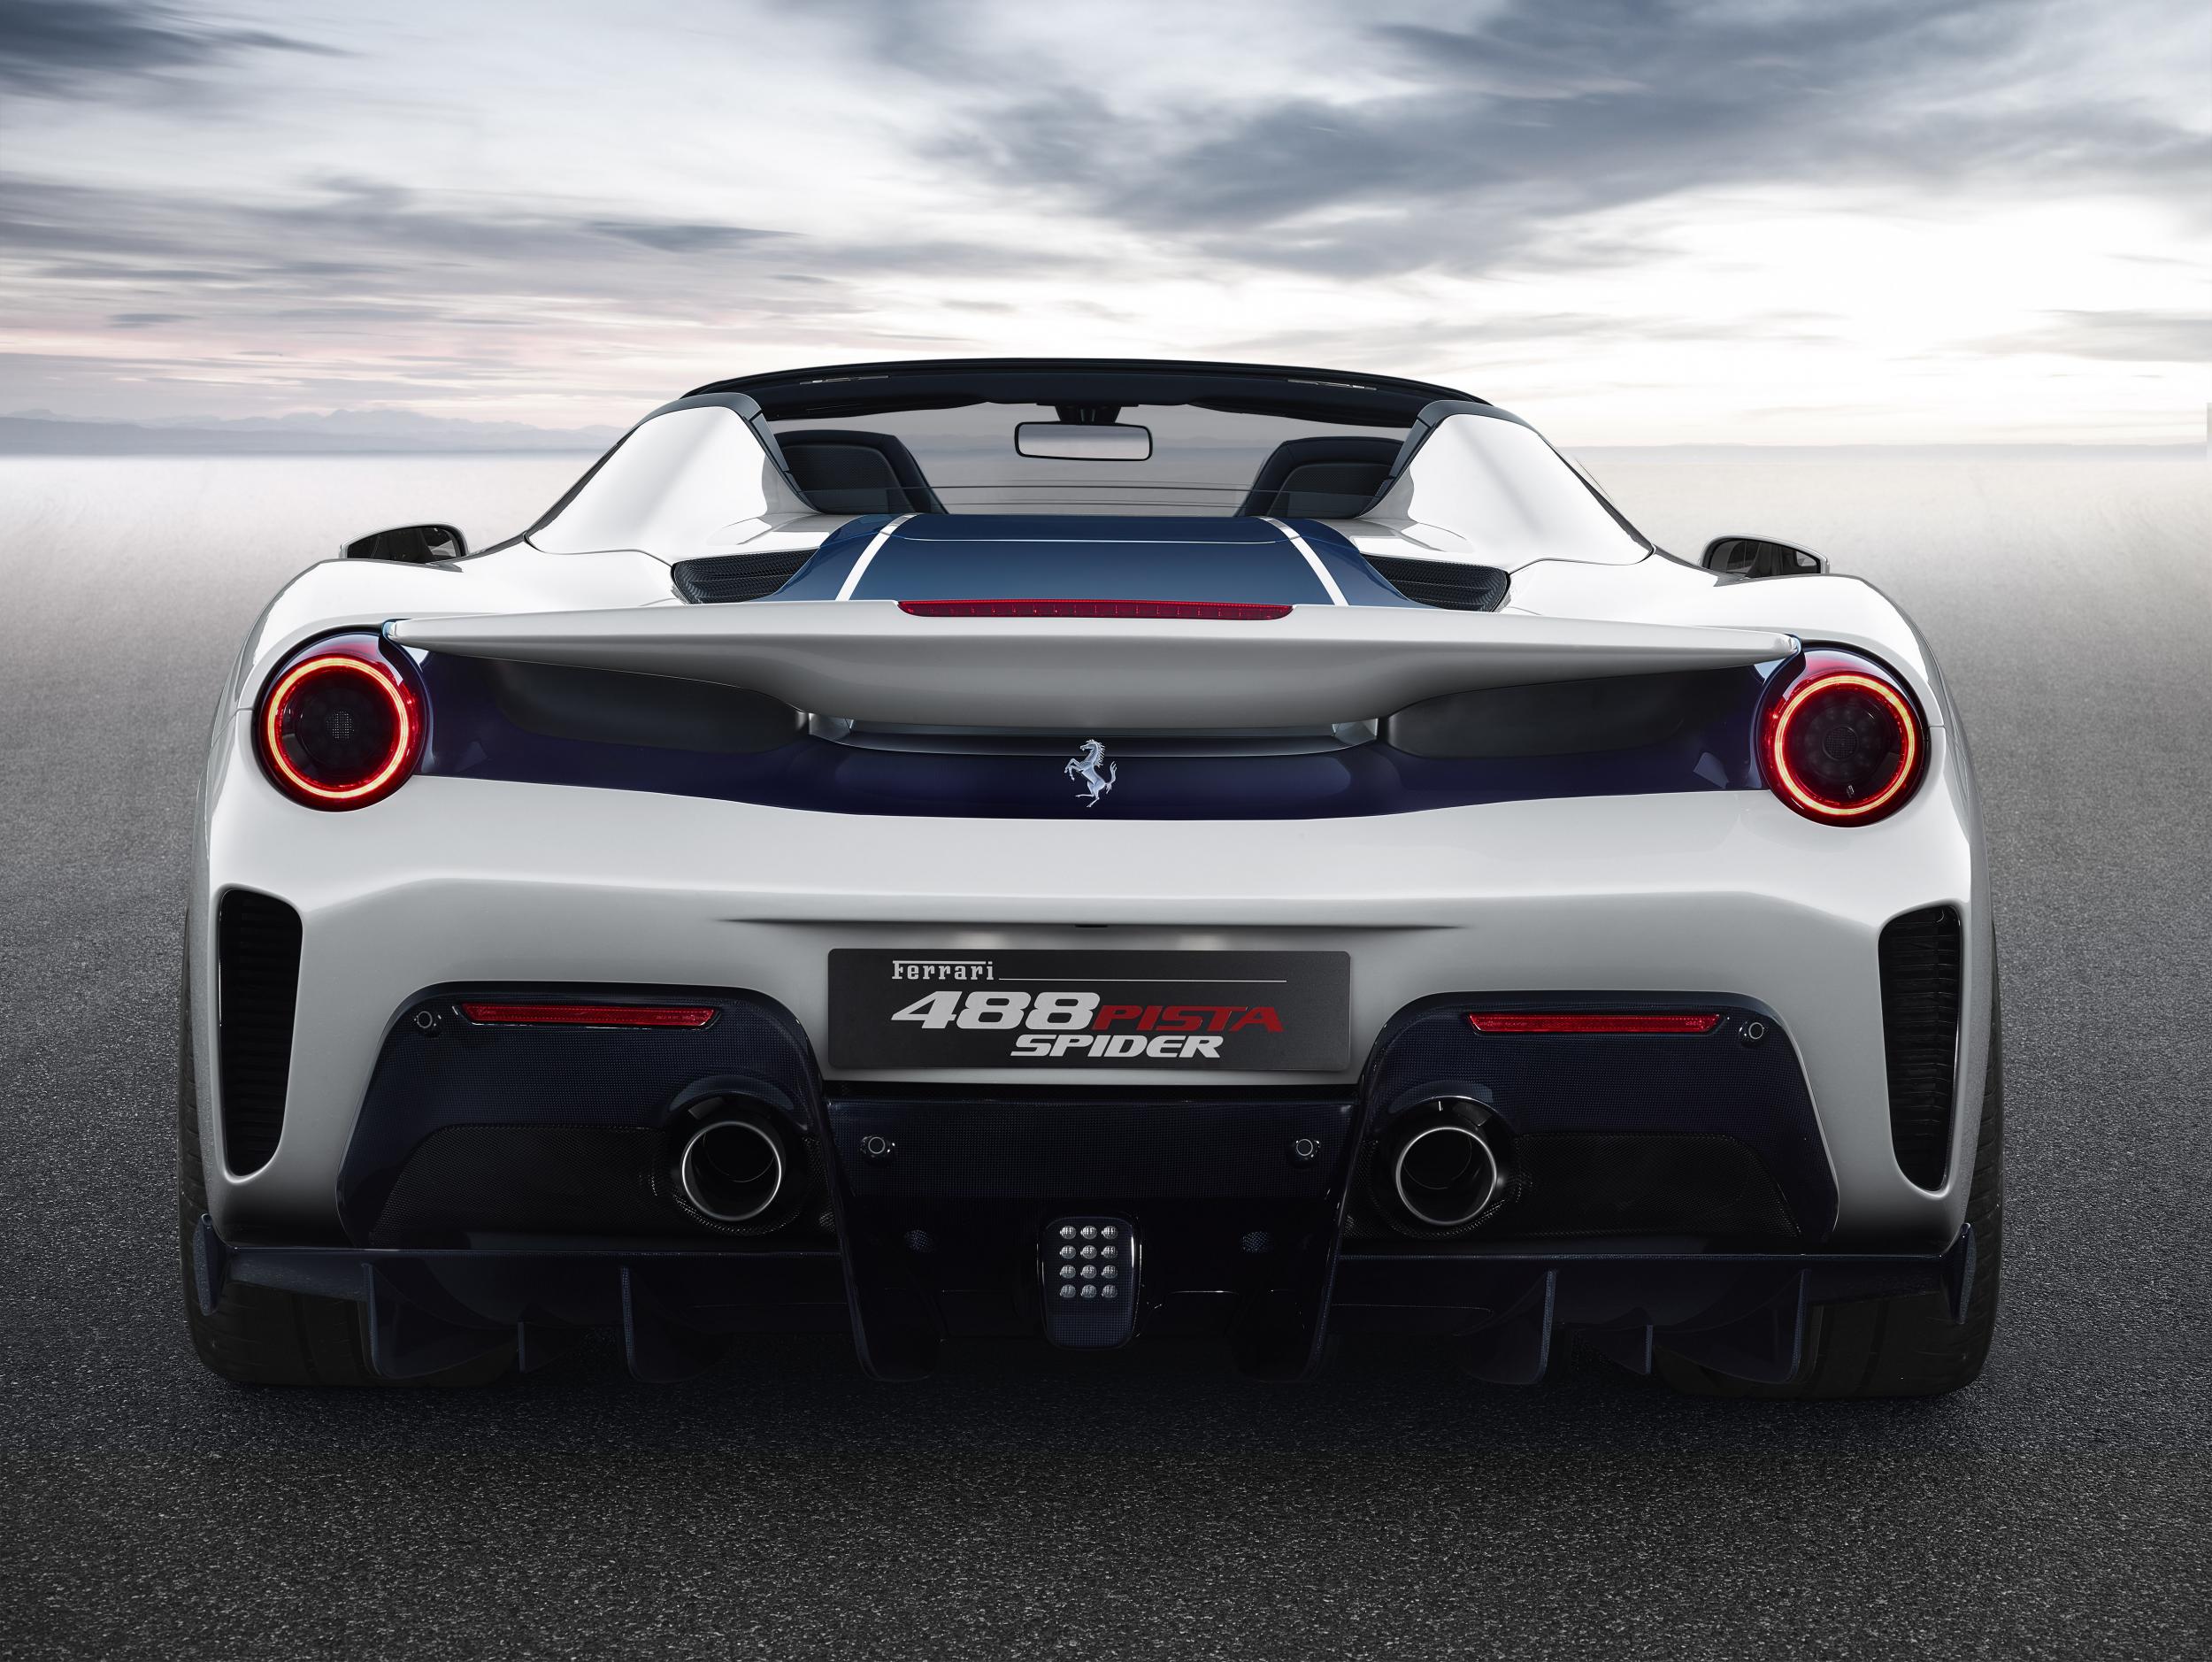 Ferrari 488 Pista Spider The Hottest Convertible Made By